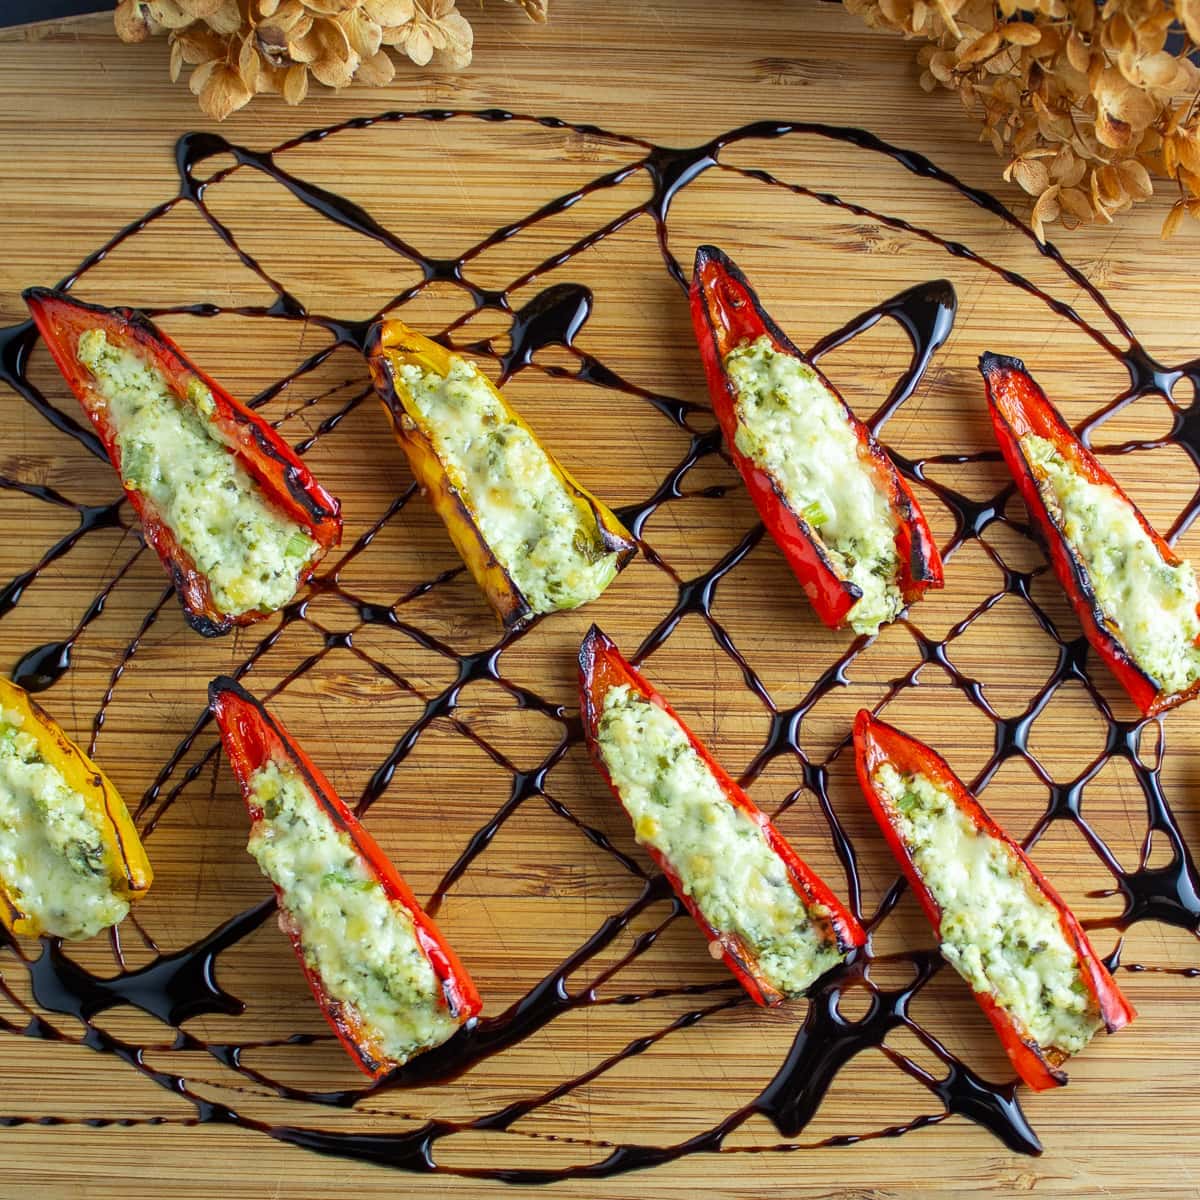 Stuffed Mini Peppers With Goat Cheese